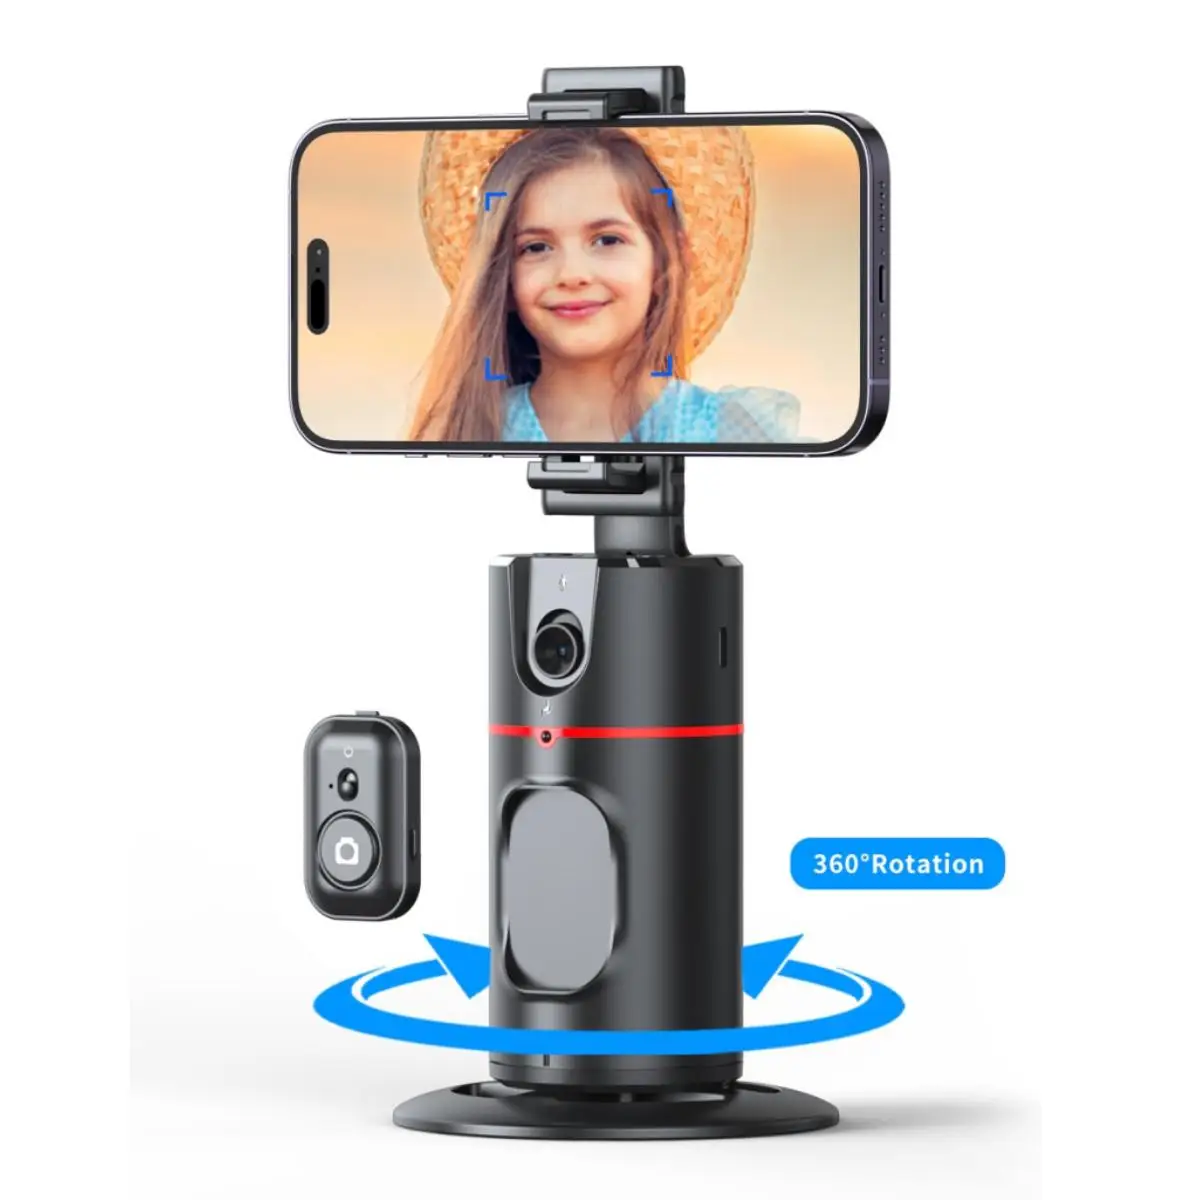 

The new model comes with a Bluetooth wireless remote control 360° smart face recognition tracking gimbal